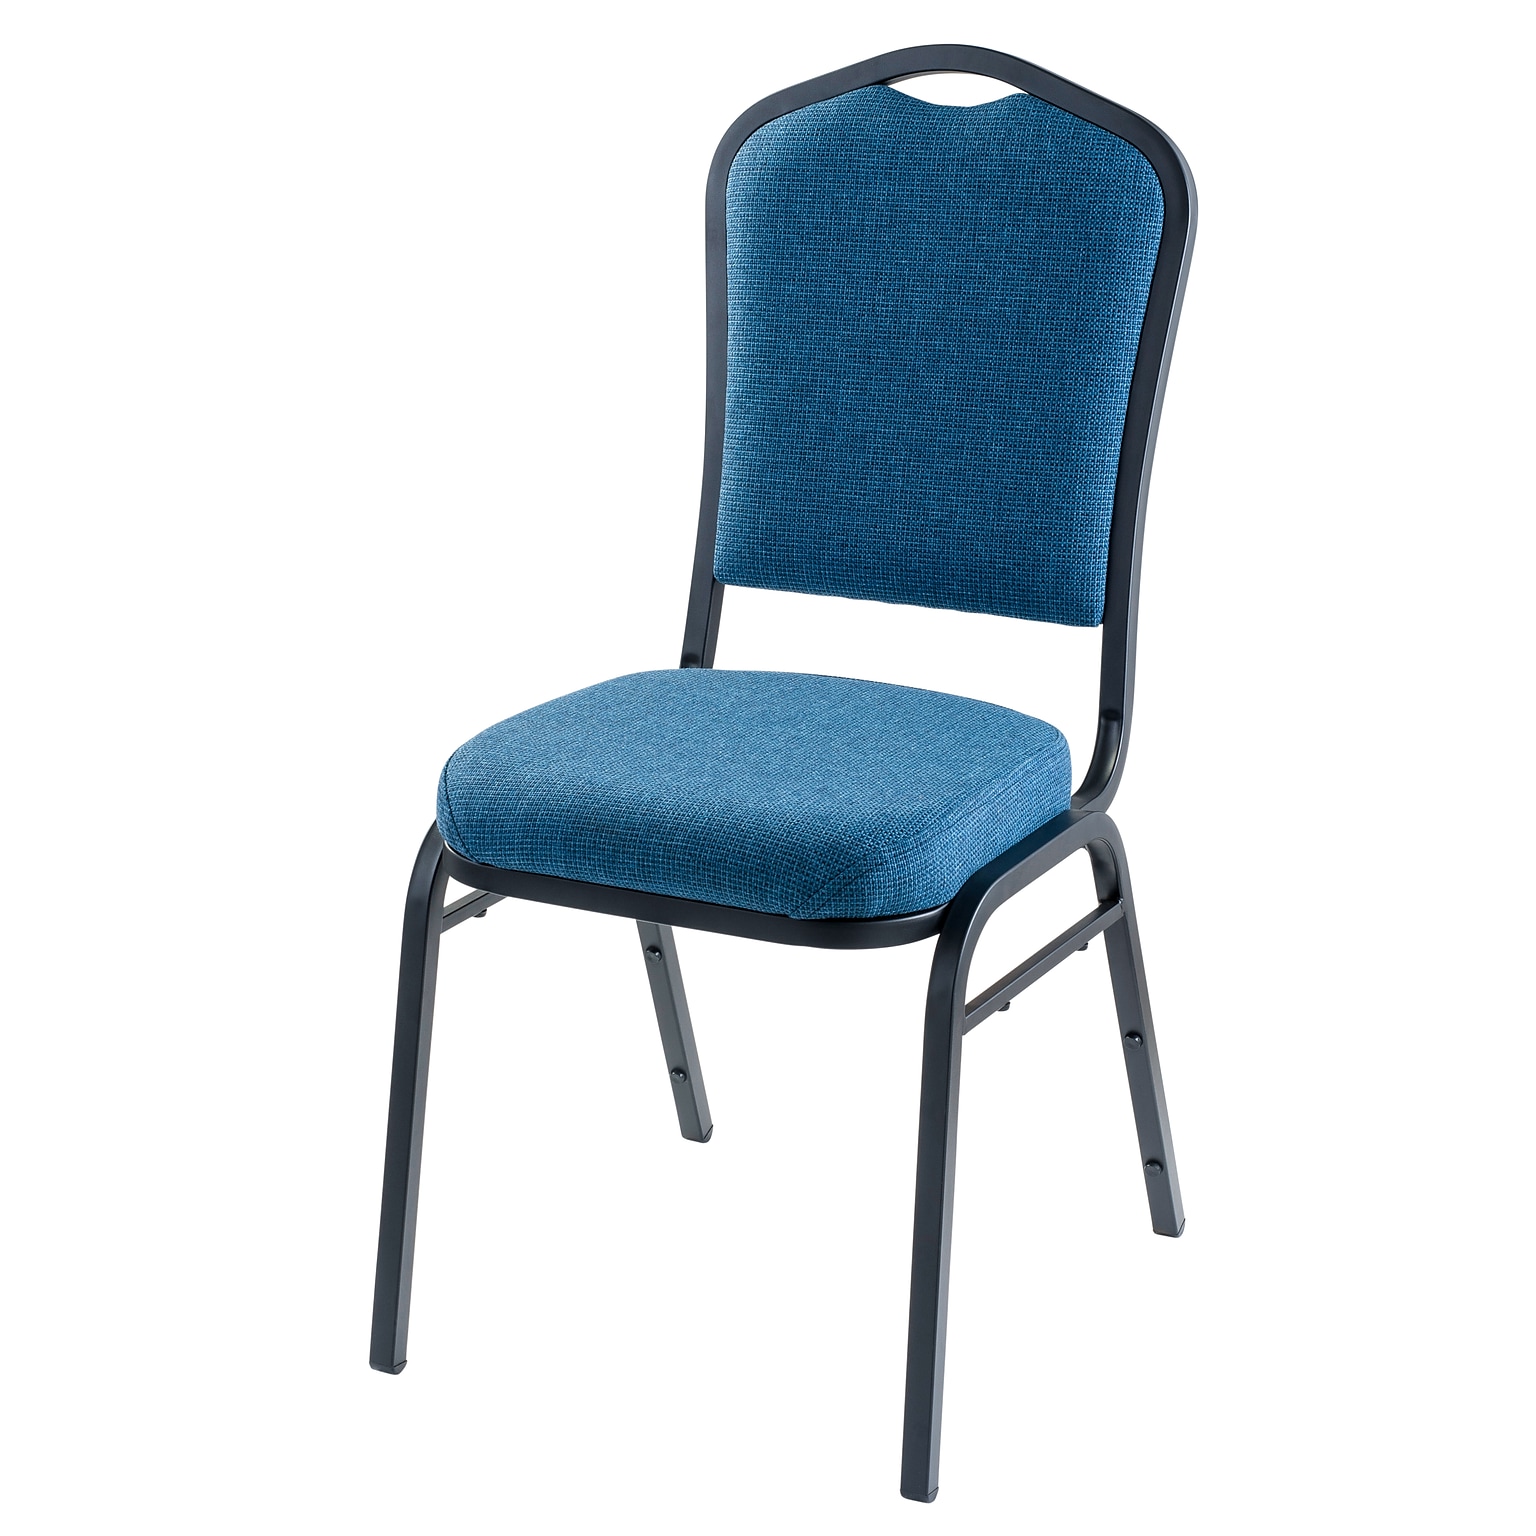 NPS 9300 Series Deluxe Fabric Upholstered Stack Chair, Natural Blue/Black Sandtex, 4 Pack (9374-BT/4)